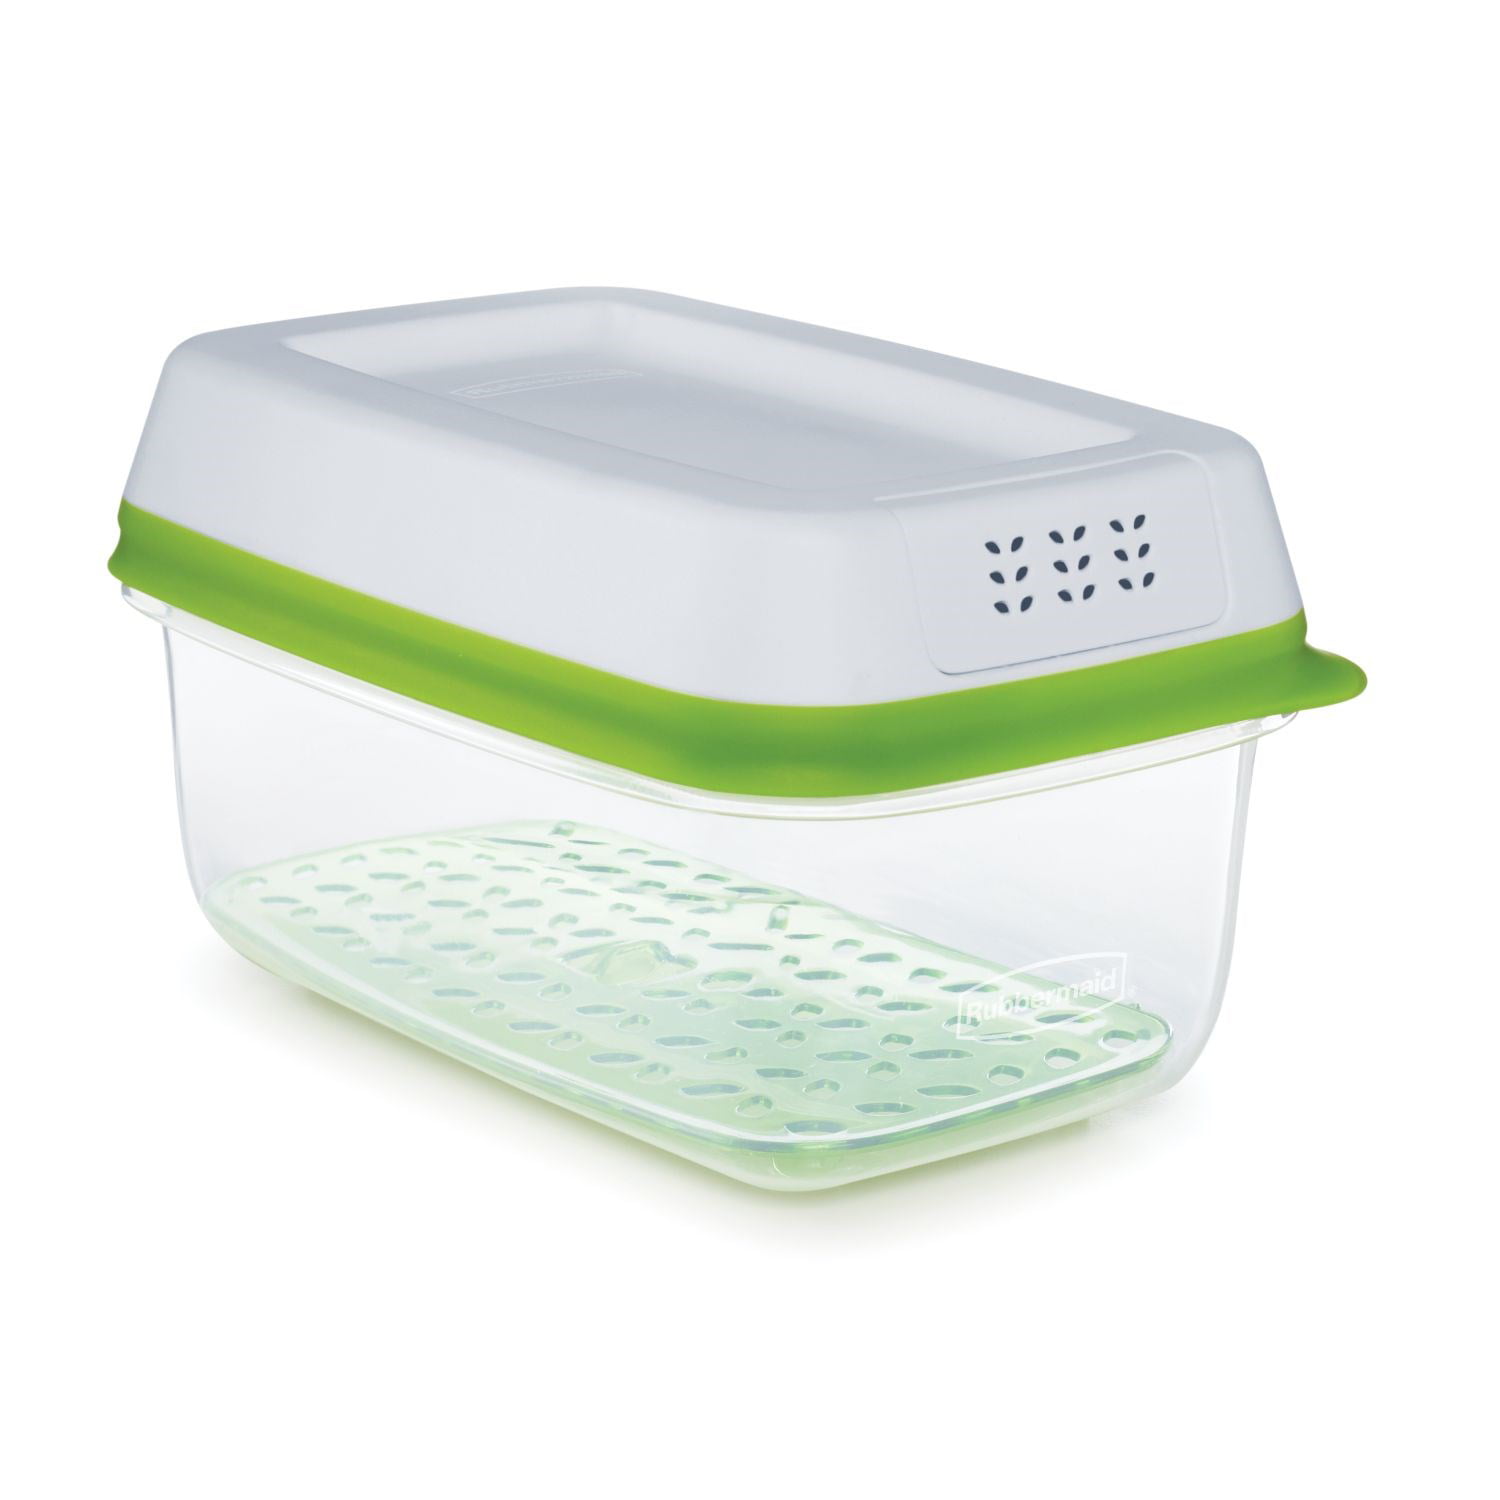 Rubbermaid 4-Piece Produce Saver Containers for Refrigerator with Lids for  Food Storage, Dishwasher Safe, Clear/Green